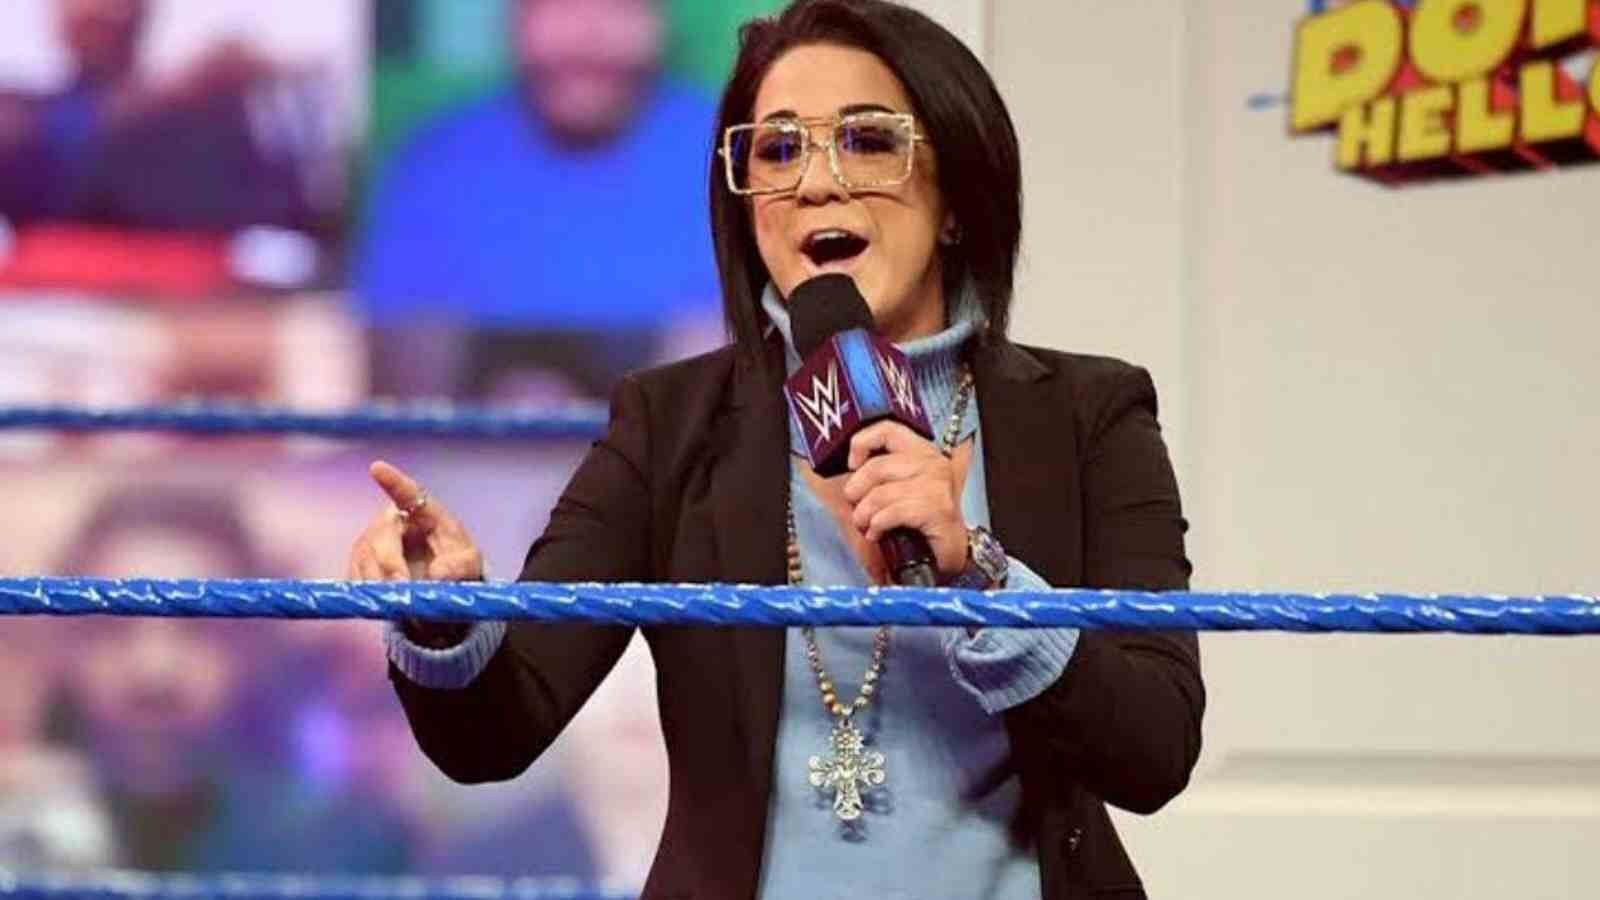 Bayley would have been a good choice to host WrestleMania.